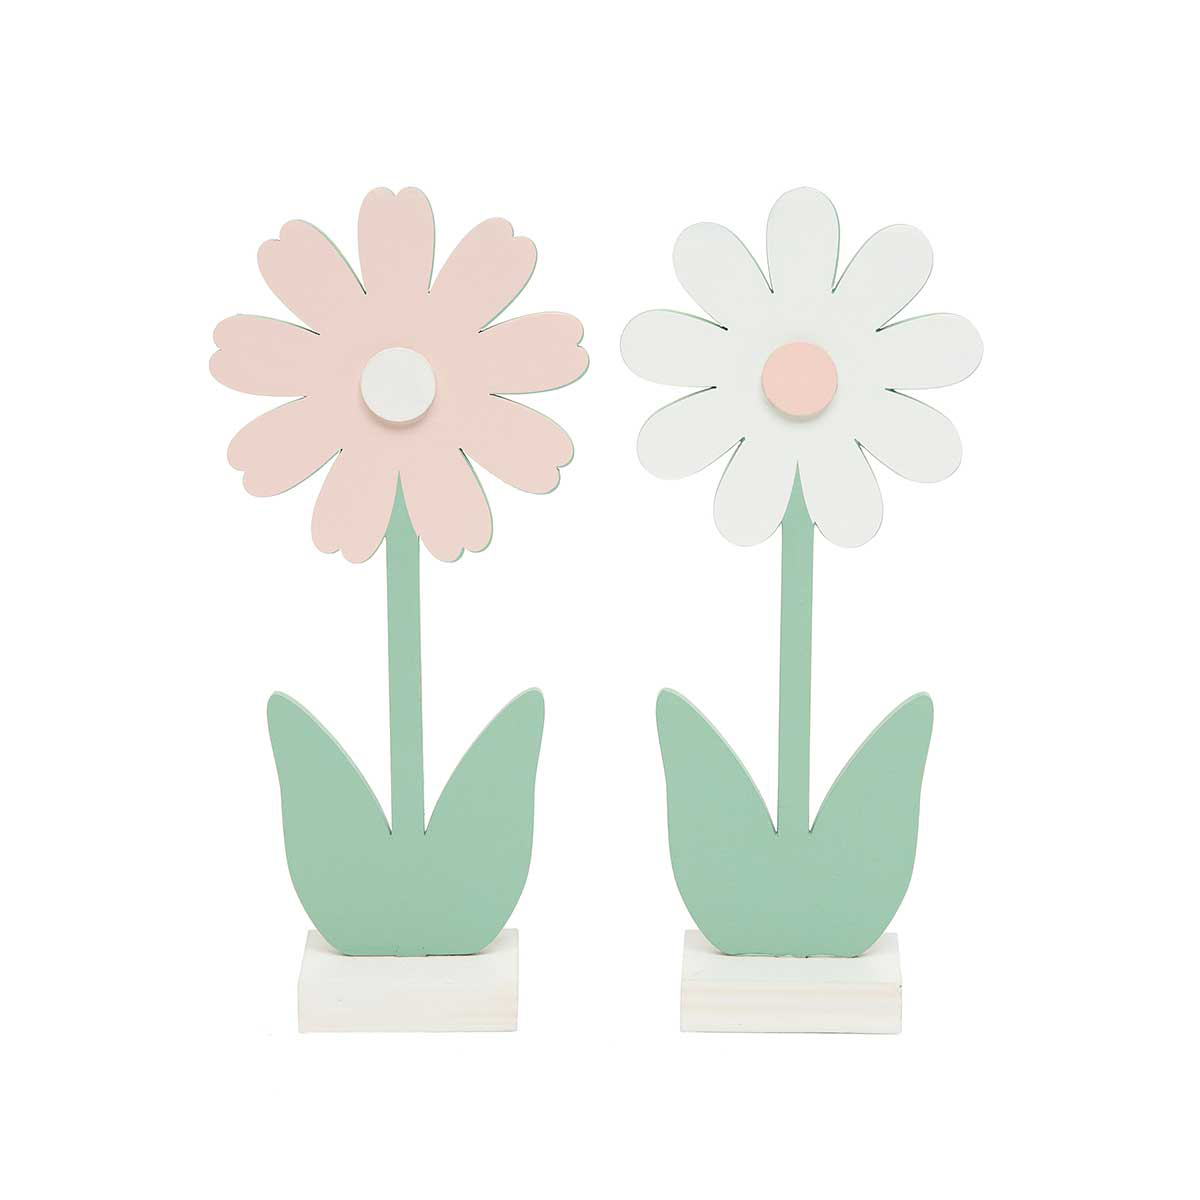 WHOOPSIE WOOD DAISY SIT-A-BOUT PINK/WHITE 2 ASSORTED